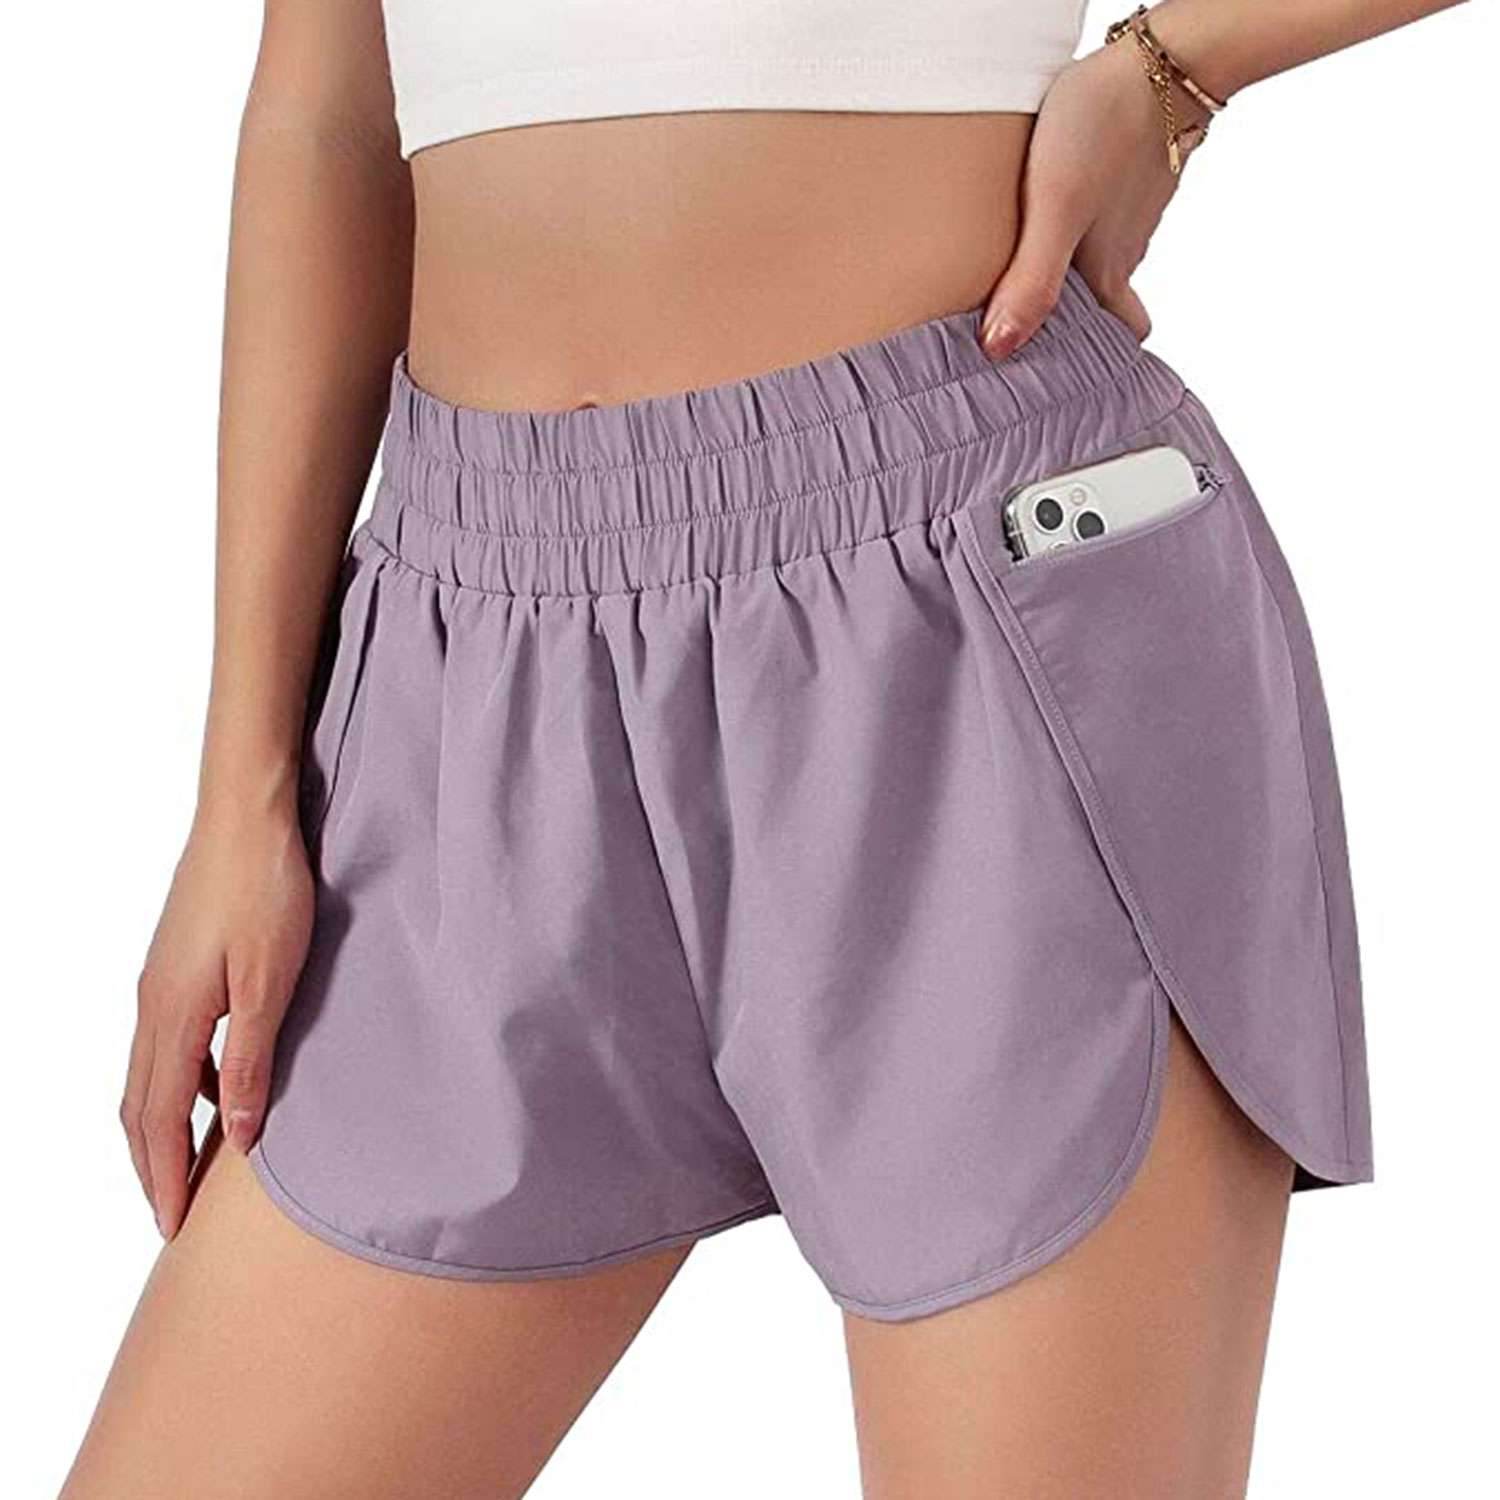 Amazon Shoppers Say These Workout Shorts Are Better Than Lululemon | Shape